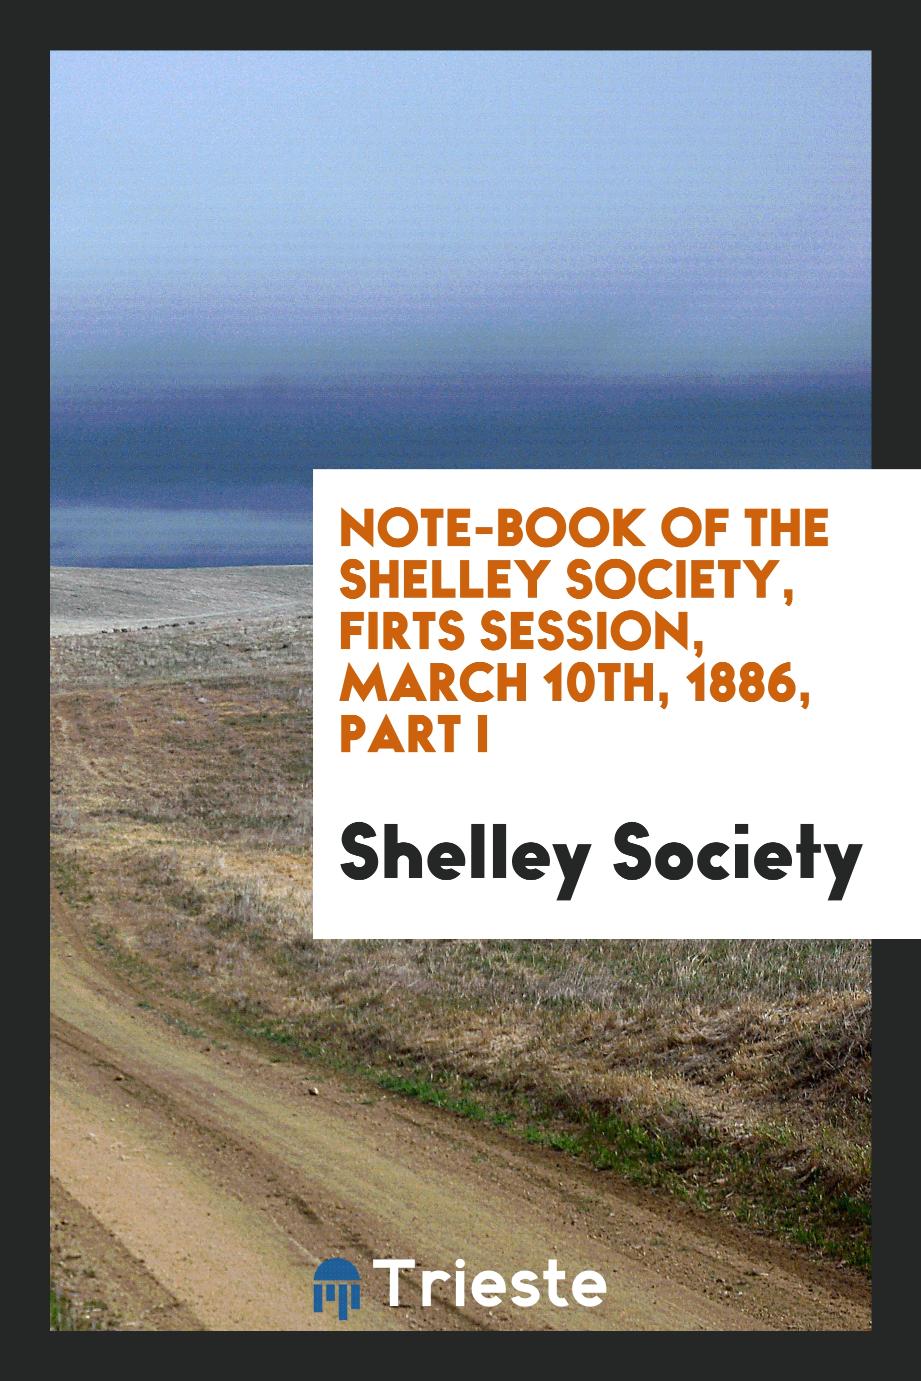 Note-book of the Shelley society, firts session, March 10th, 1886, Part I